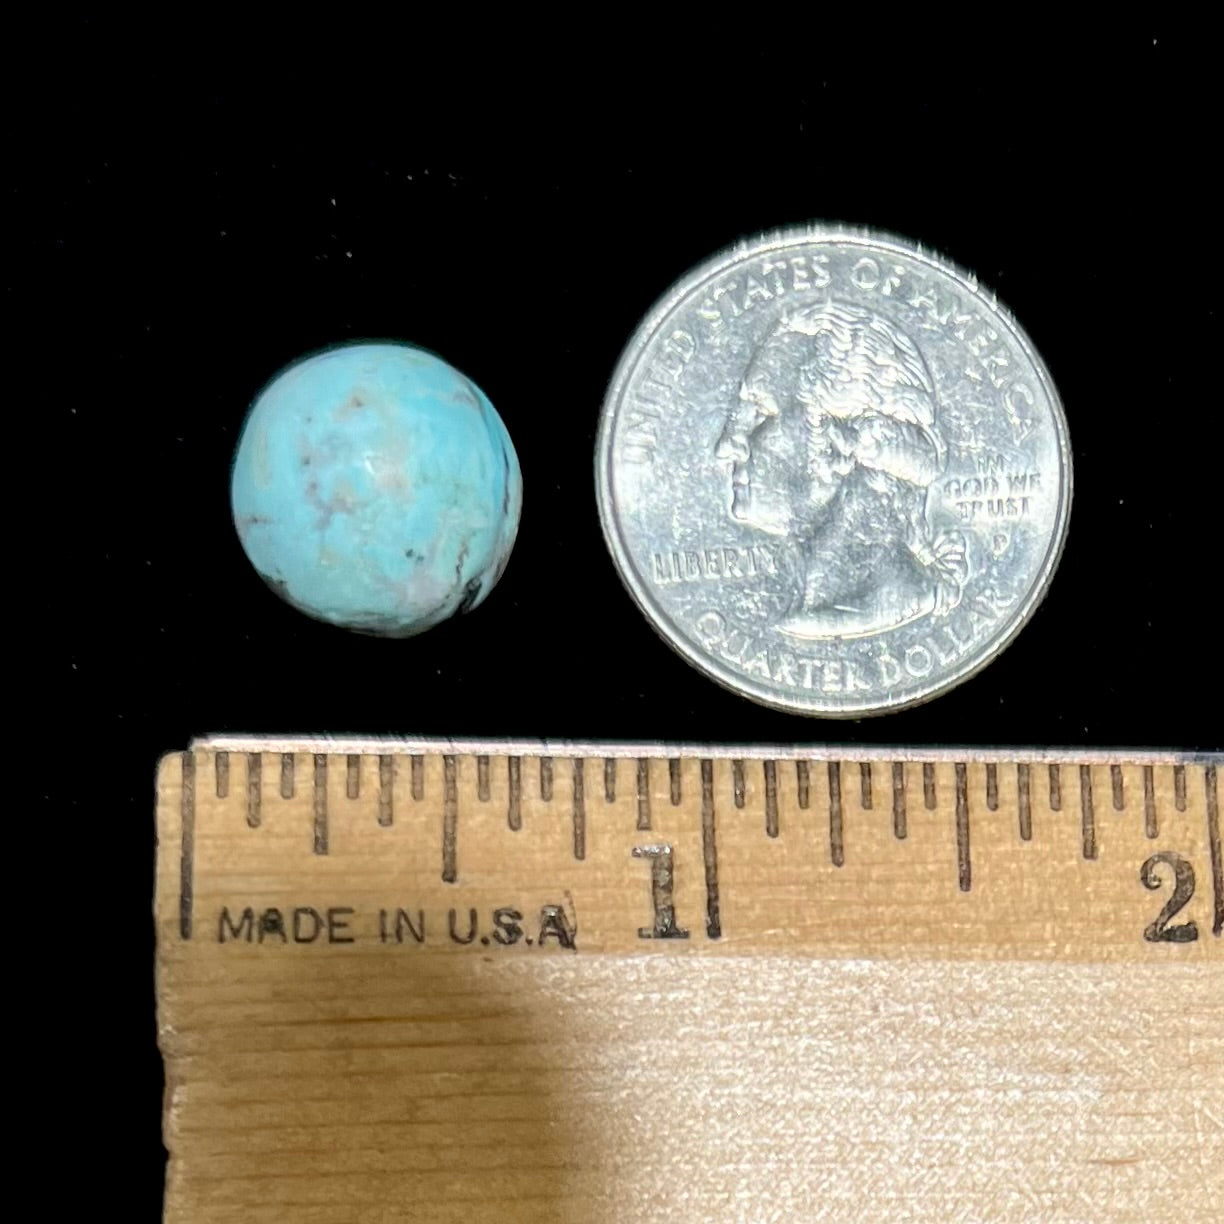 A loose, round cabochon cut Valley Blue turquoise stone.